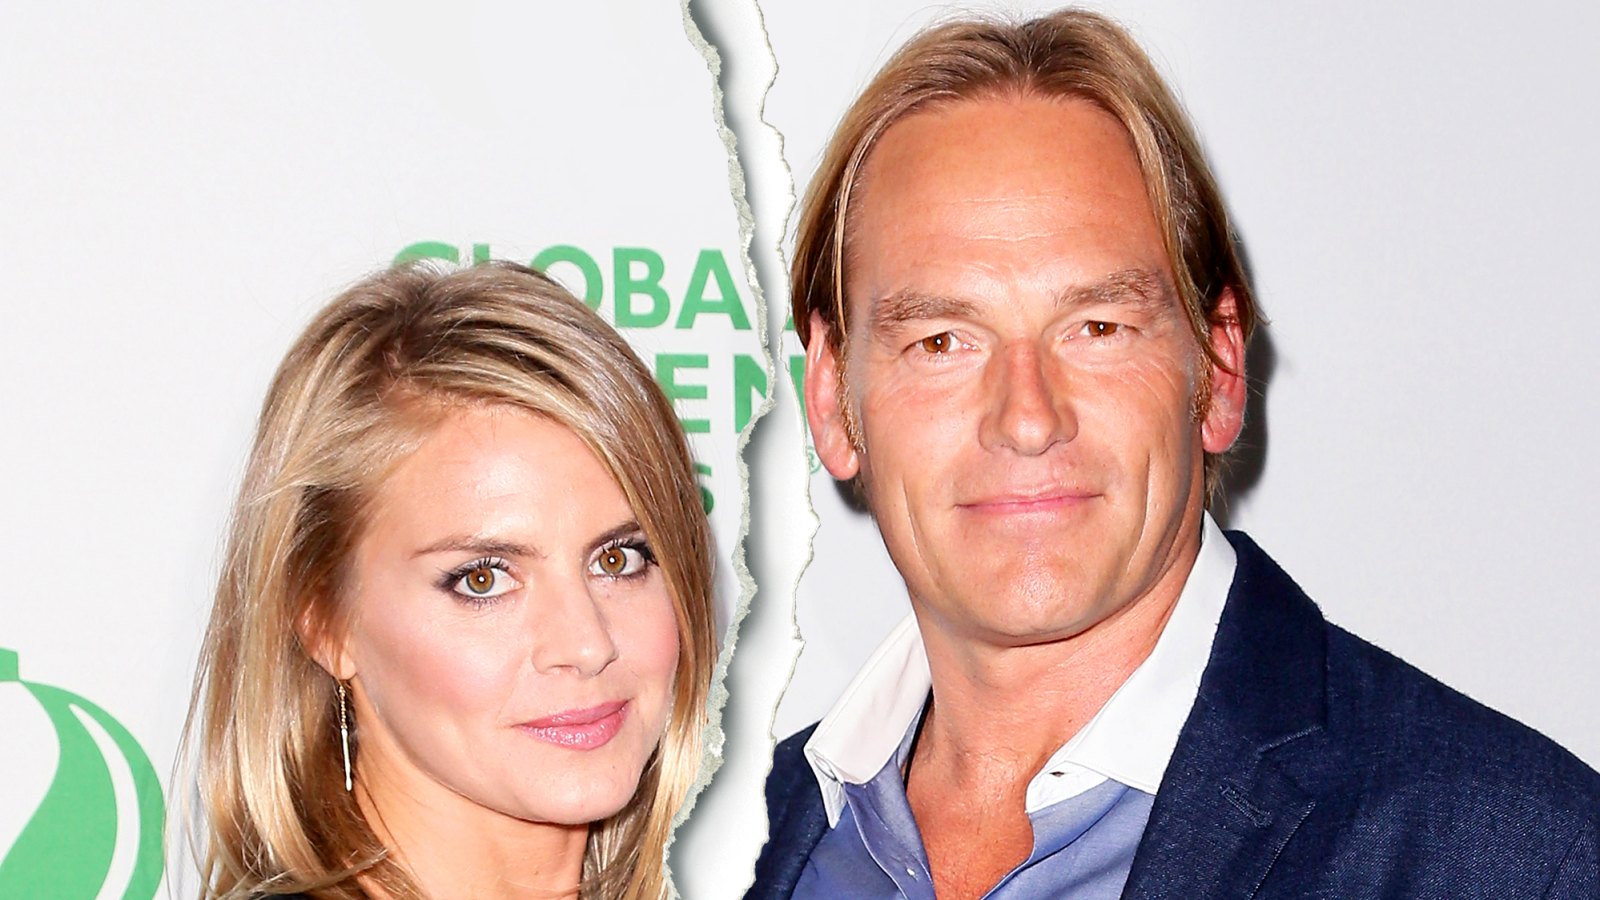 Eliza Coupe and Darin Olien attend Global Green USA's 11th Annual Pre-Oscar Party at Avalon in Hollywood, California.